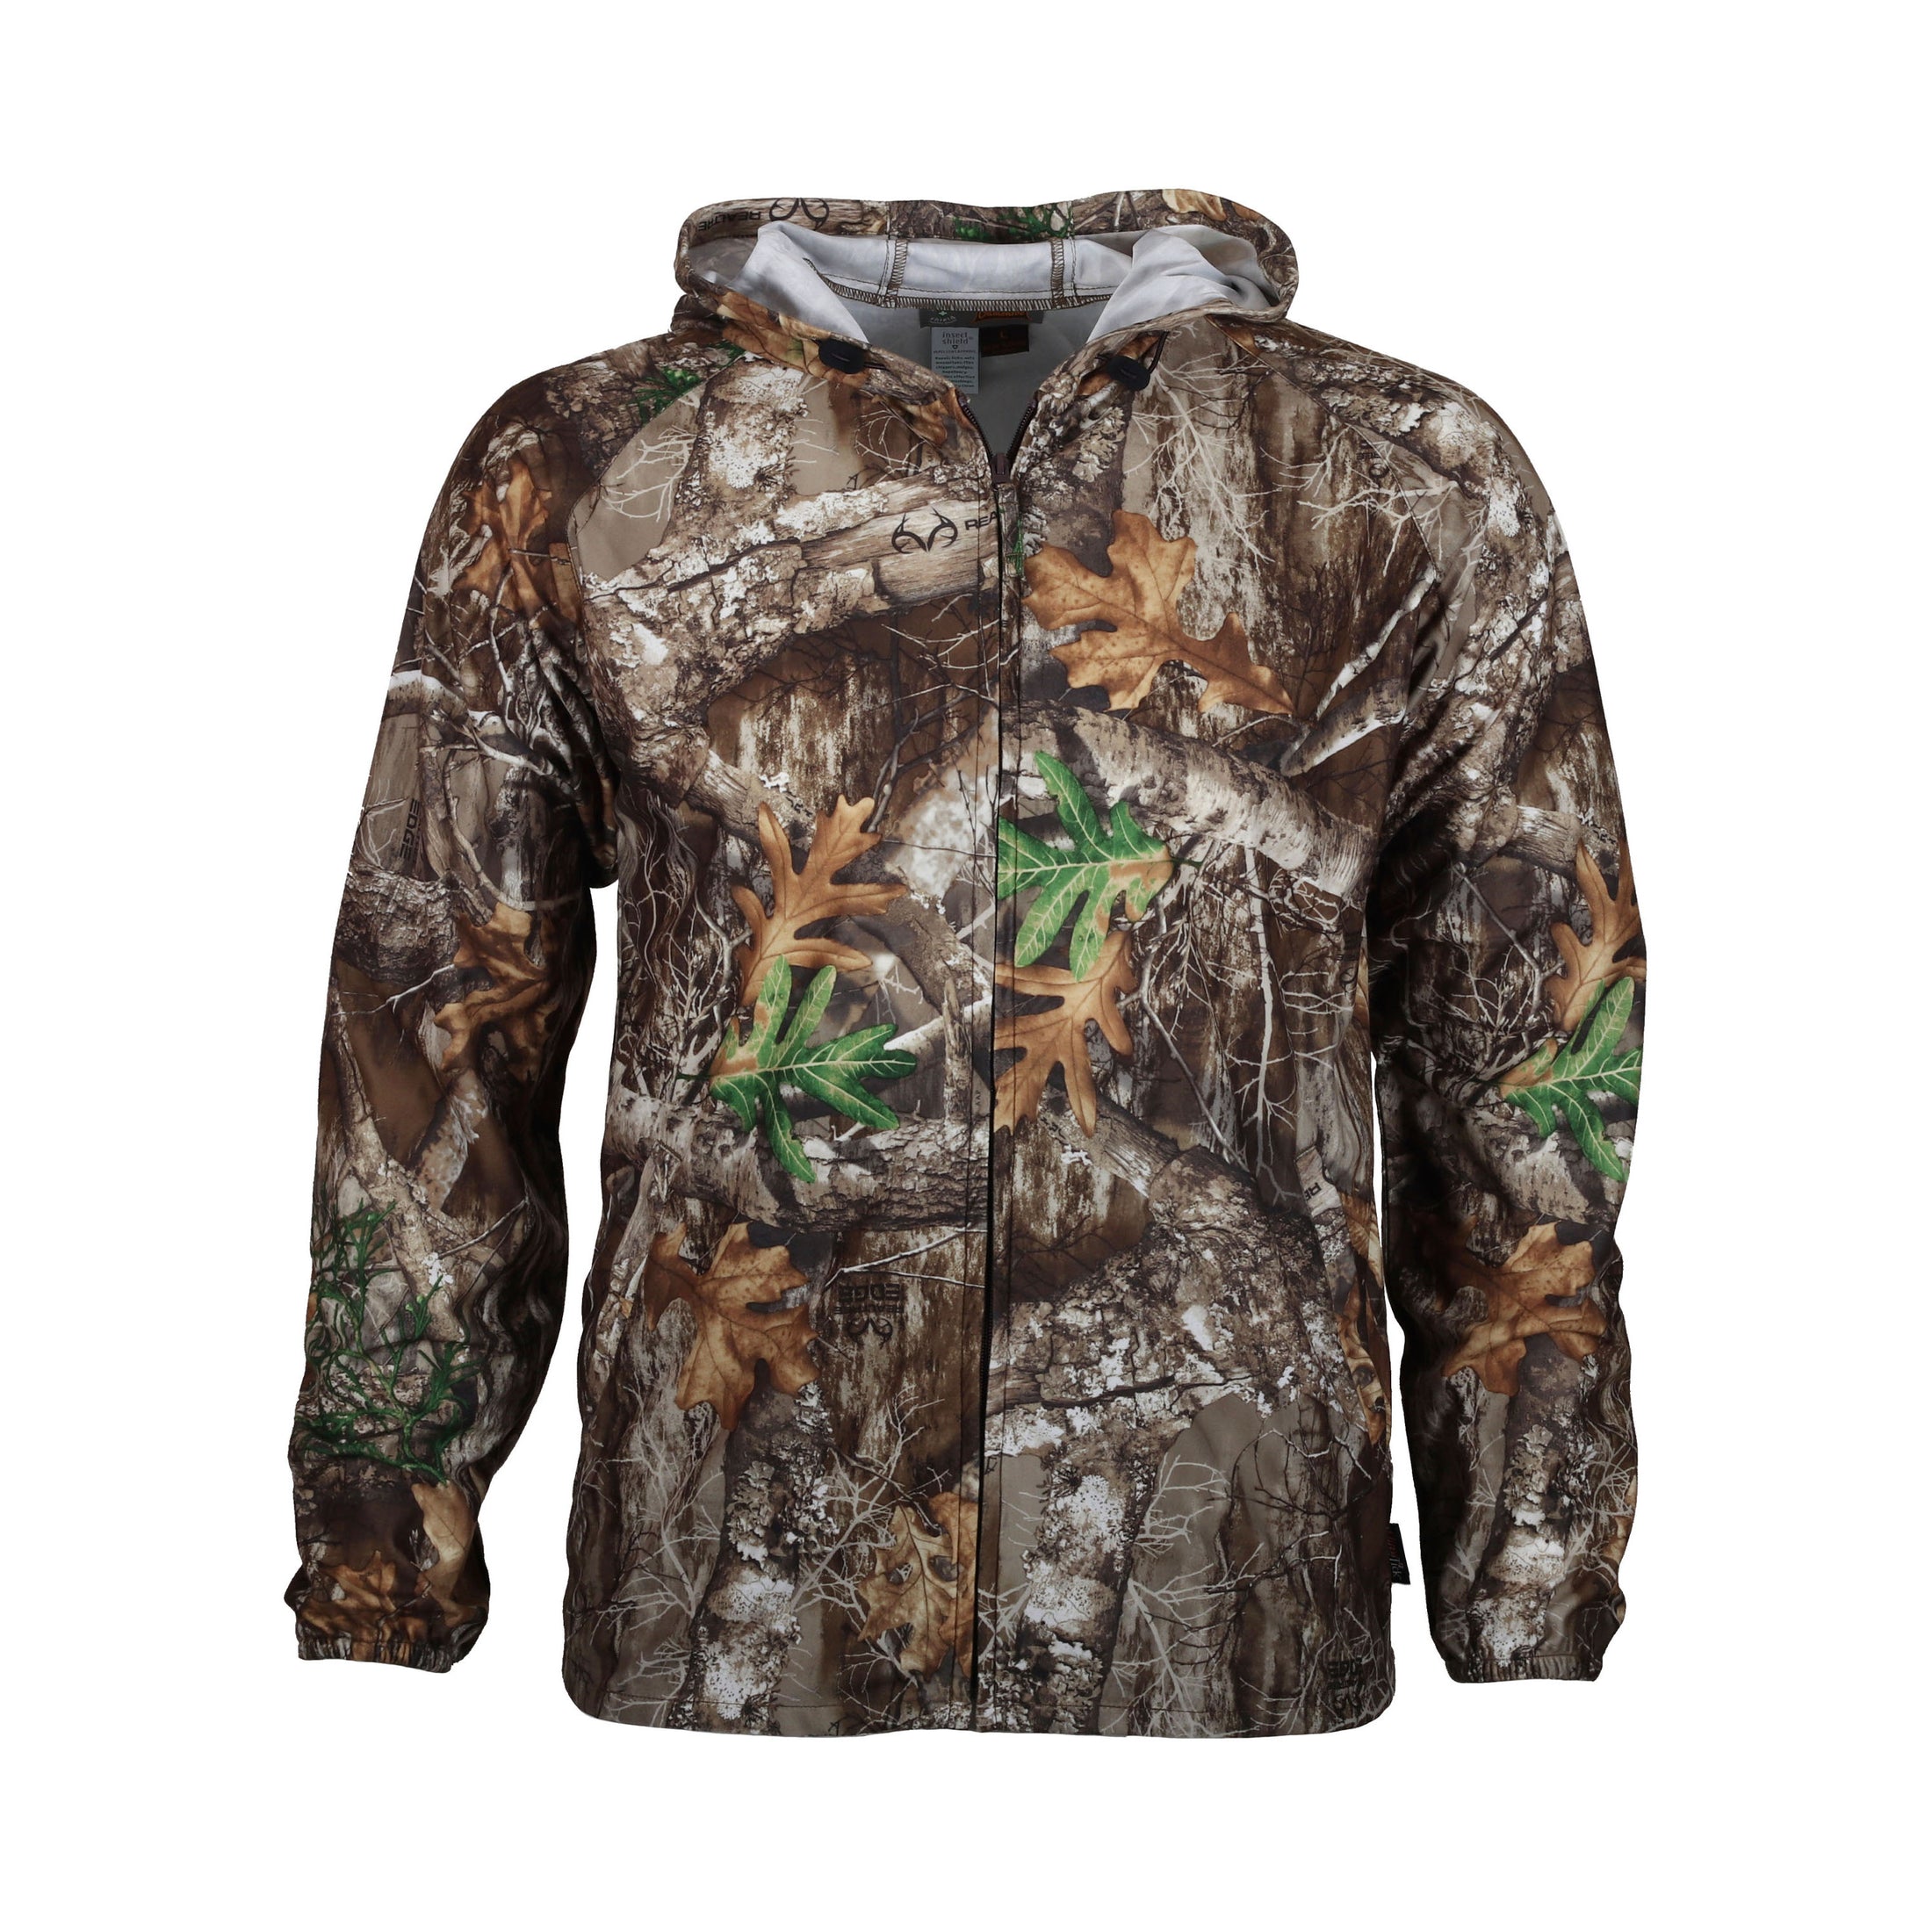 gamehide ElimiTick Insect Repellent Cover Up Jacket front (realtree edge)